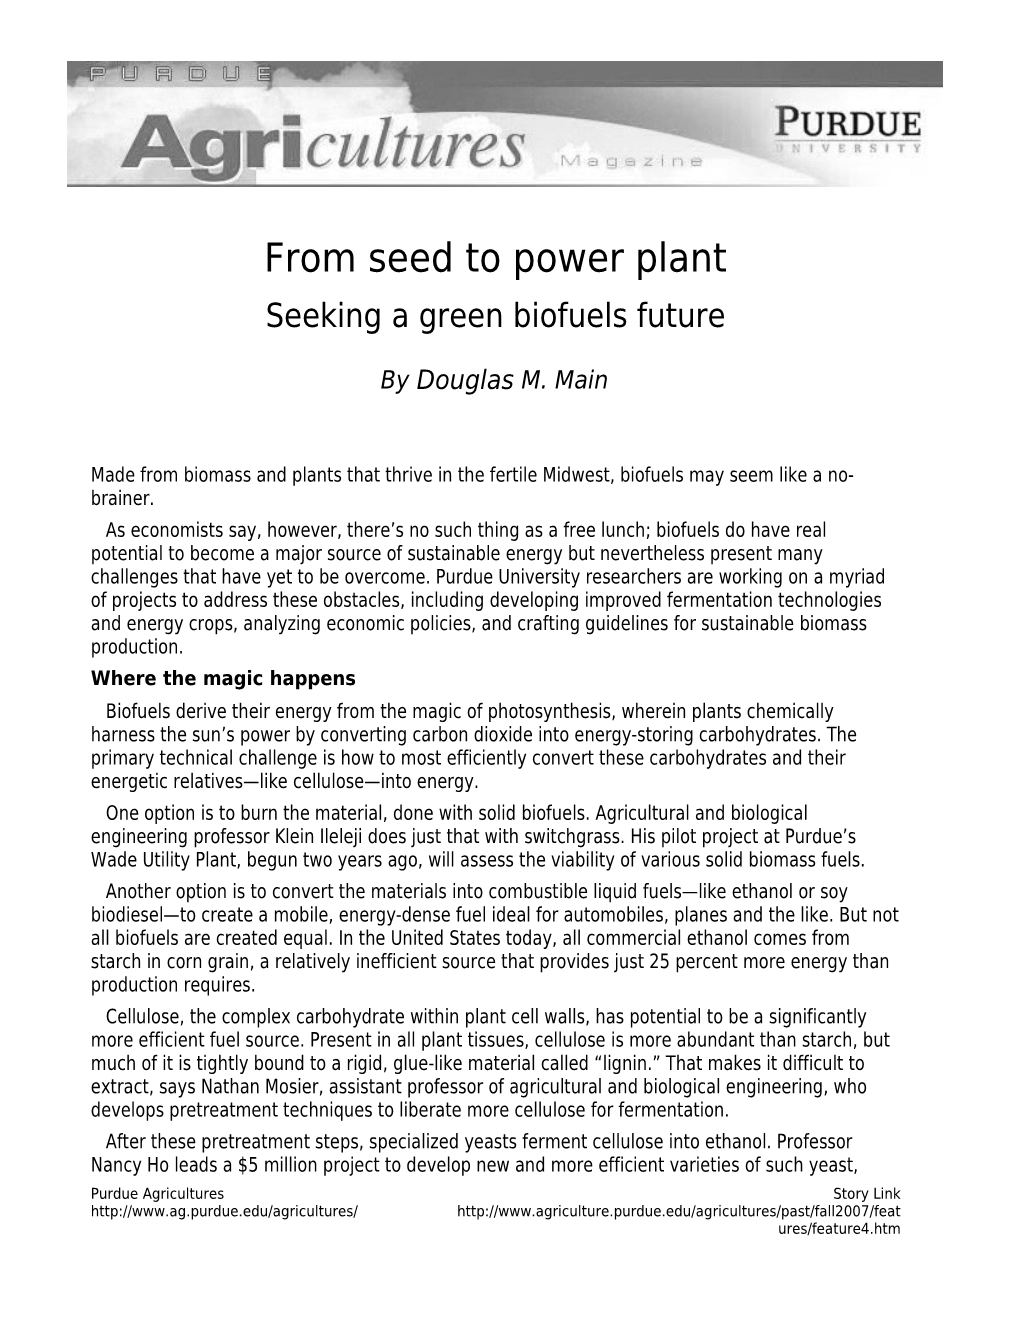 From Seed to Power Plant